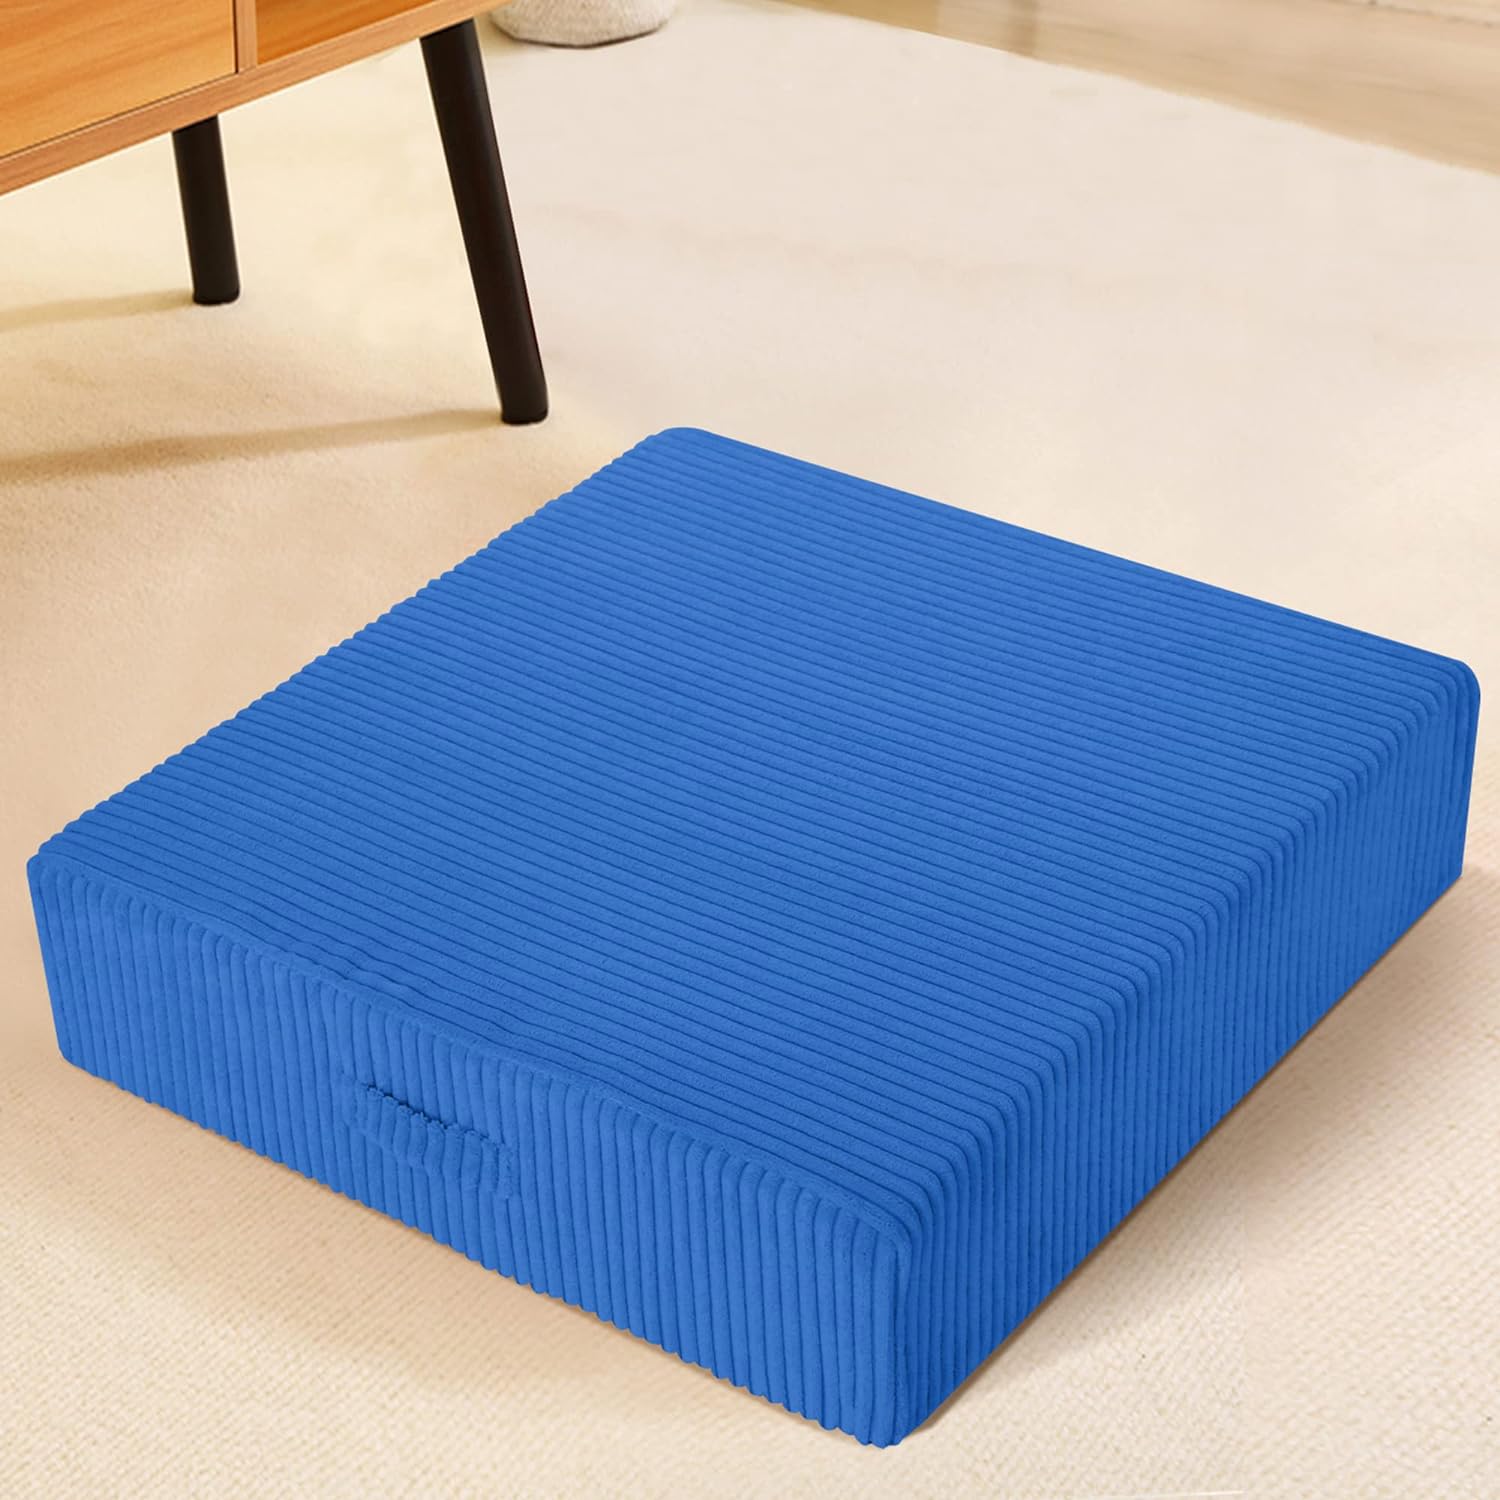 MeMoreCool Large Floor Pillow Adults Floor Cushion for Sitting, Washable Floor Pillow Seating with Firm Foam Insert, Corduroy Floor Sitting Pad, Square Meditation Pillow Thick Seat Cushion 22 Inch